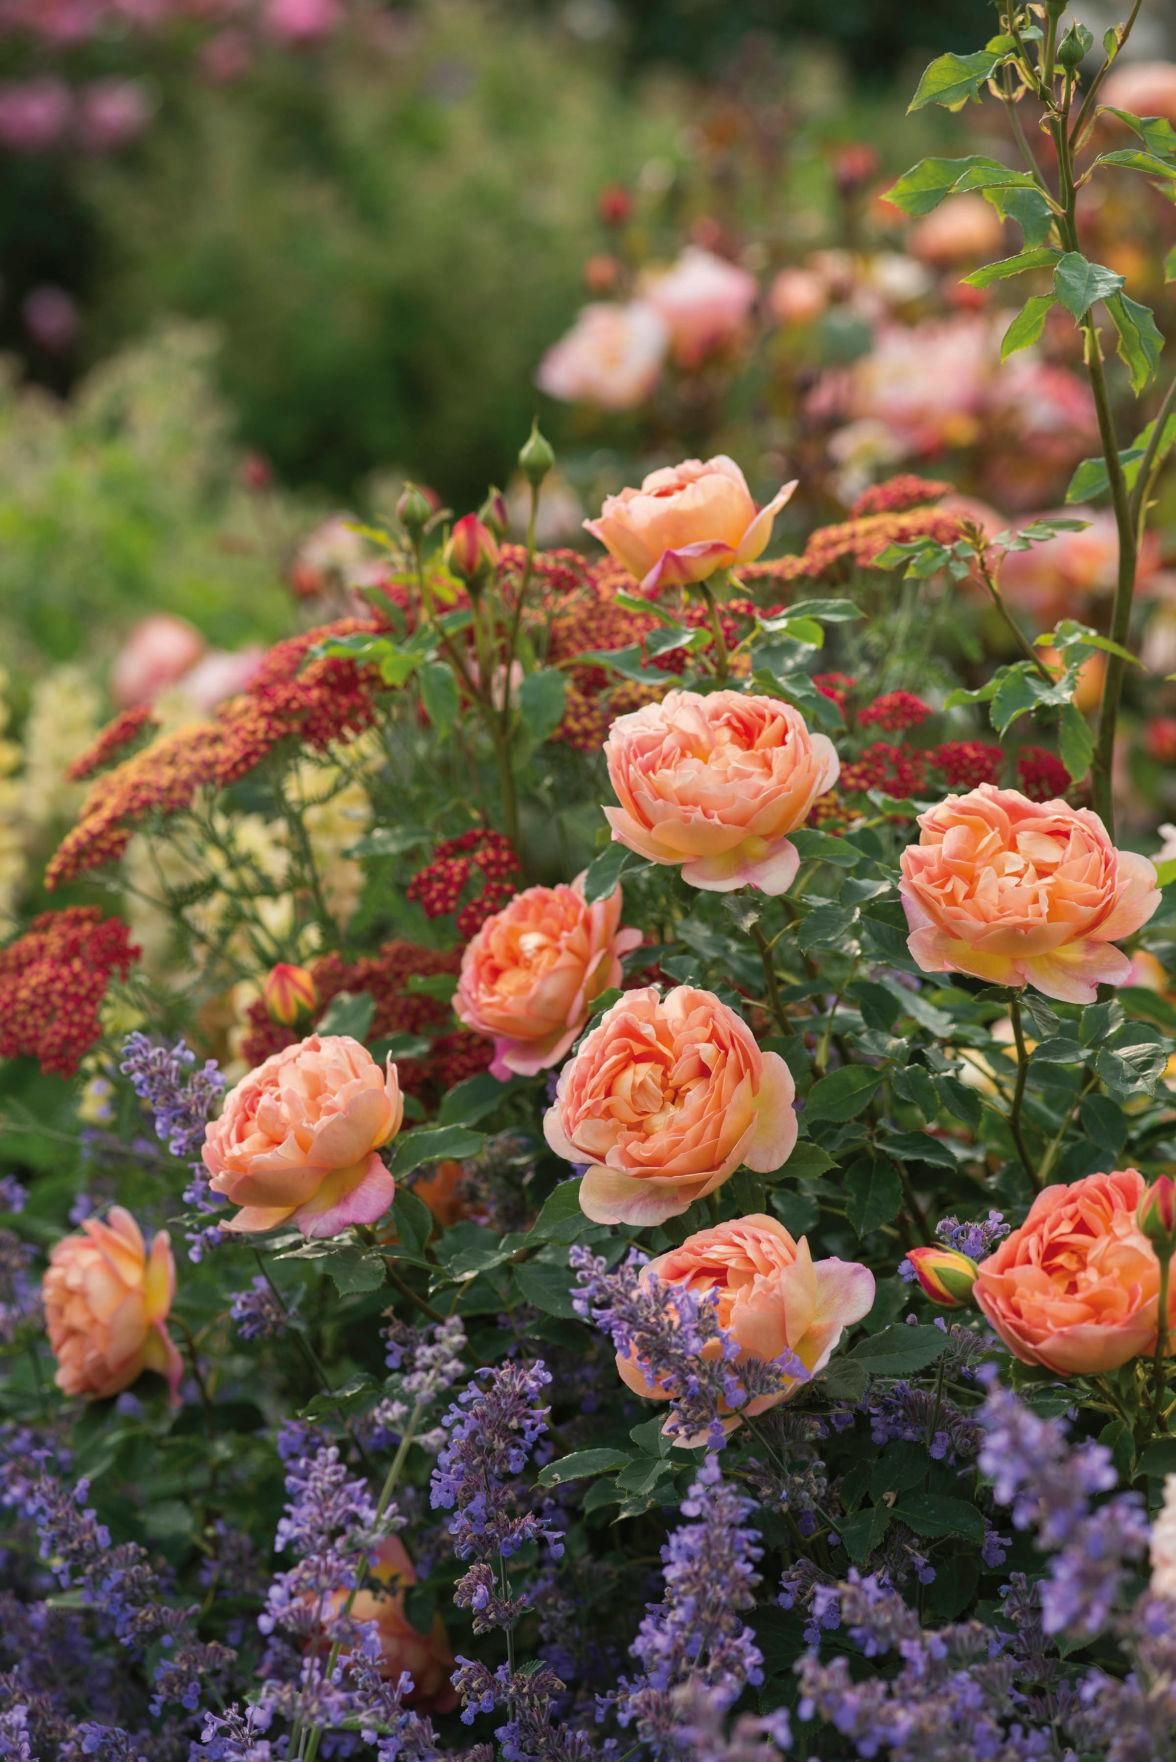 Rose Flower Garden : Discover the Beauty of a Rose Flower Garden with Hundreds of Varieties in Full Bloom